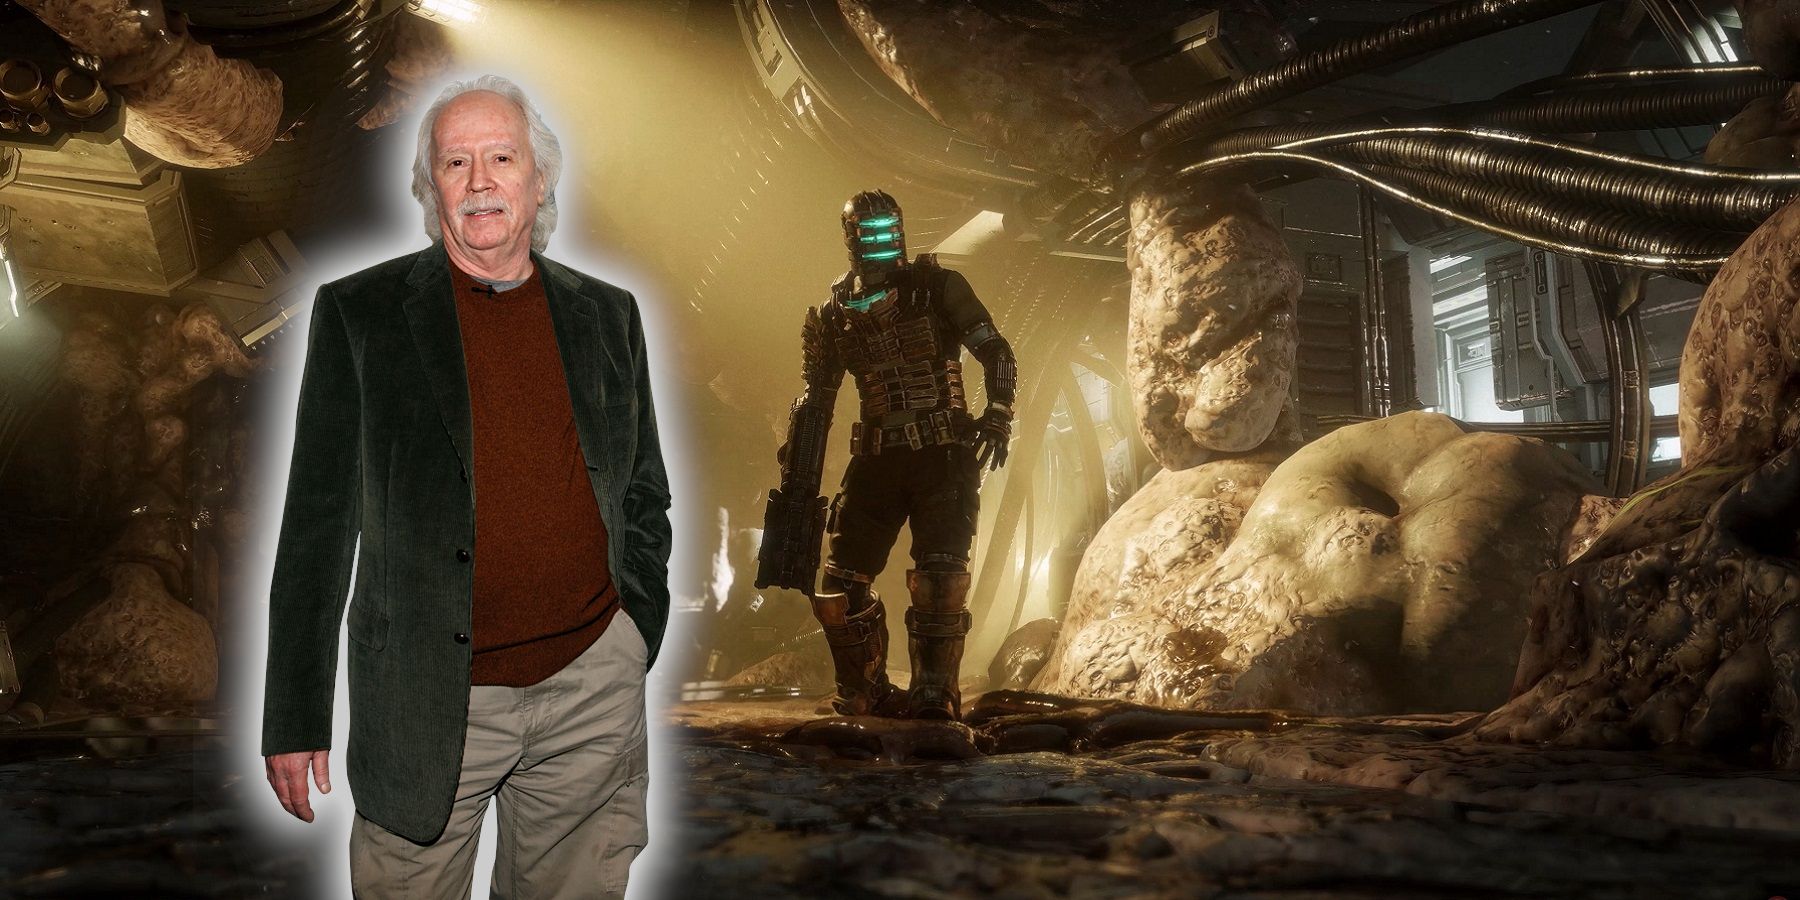 Image from the Dead Space remake showing Isaac Clarke wandering around the Ishimura with John Carpenter in the foreground.